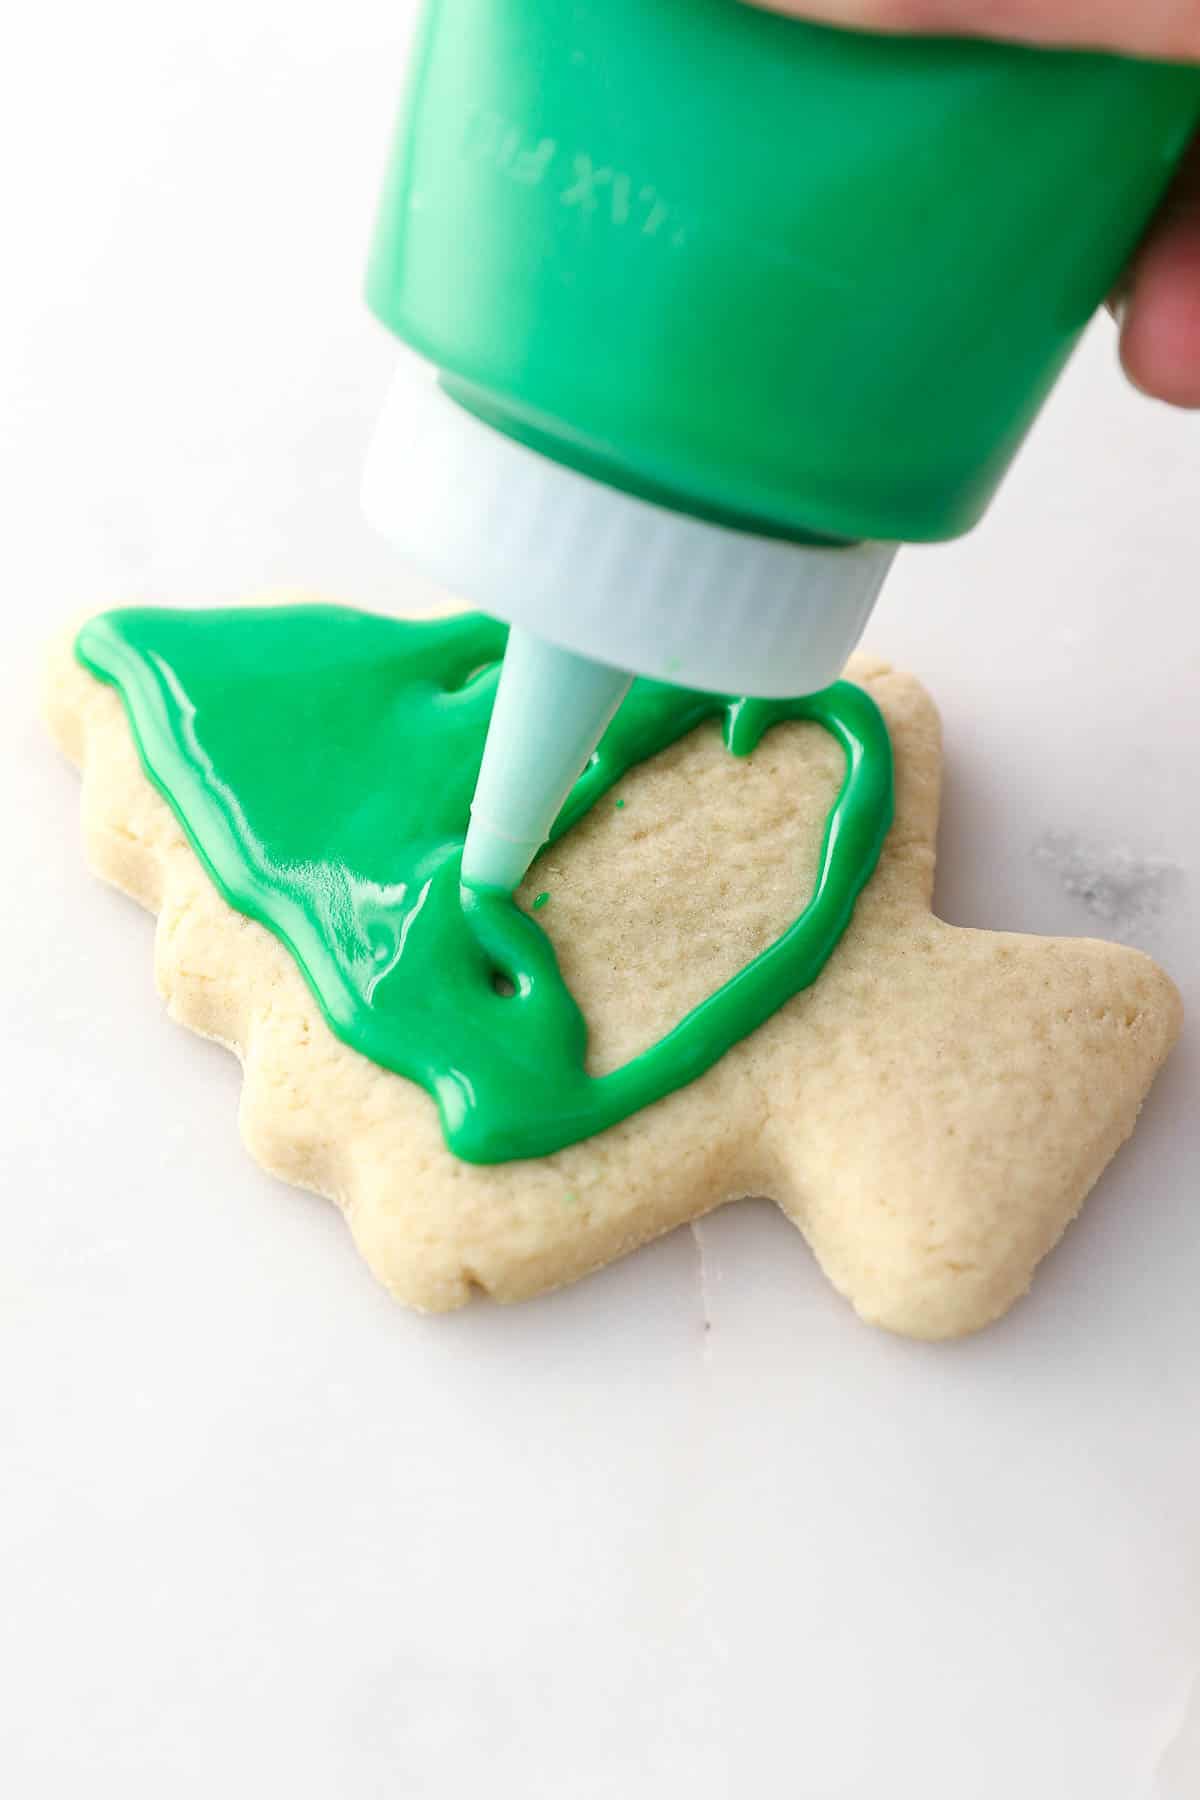 A squeeze bottle pipes green icing over a cut-out sugar cookie shaped like a Christmas tree.